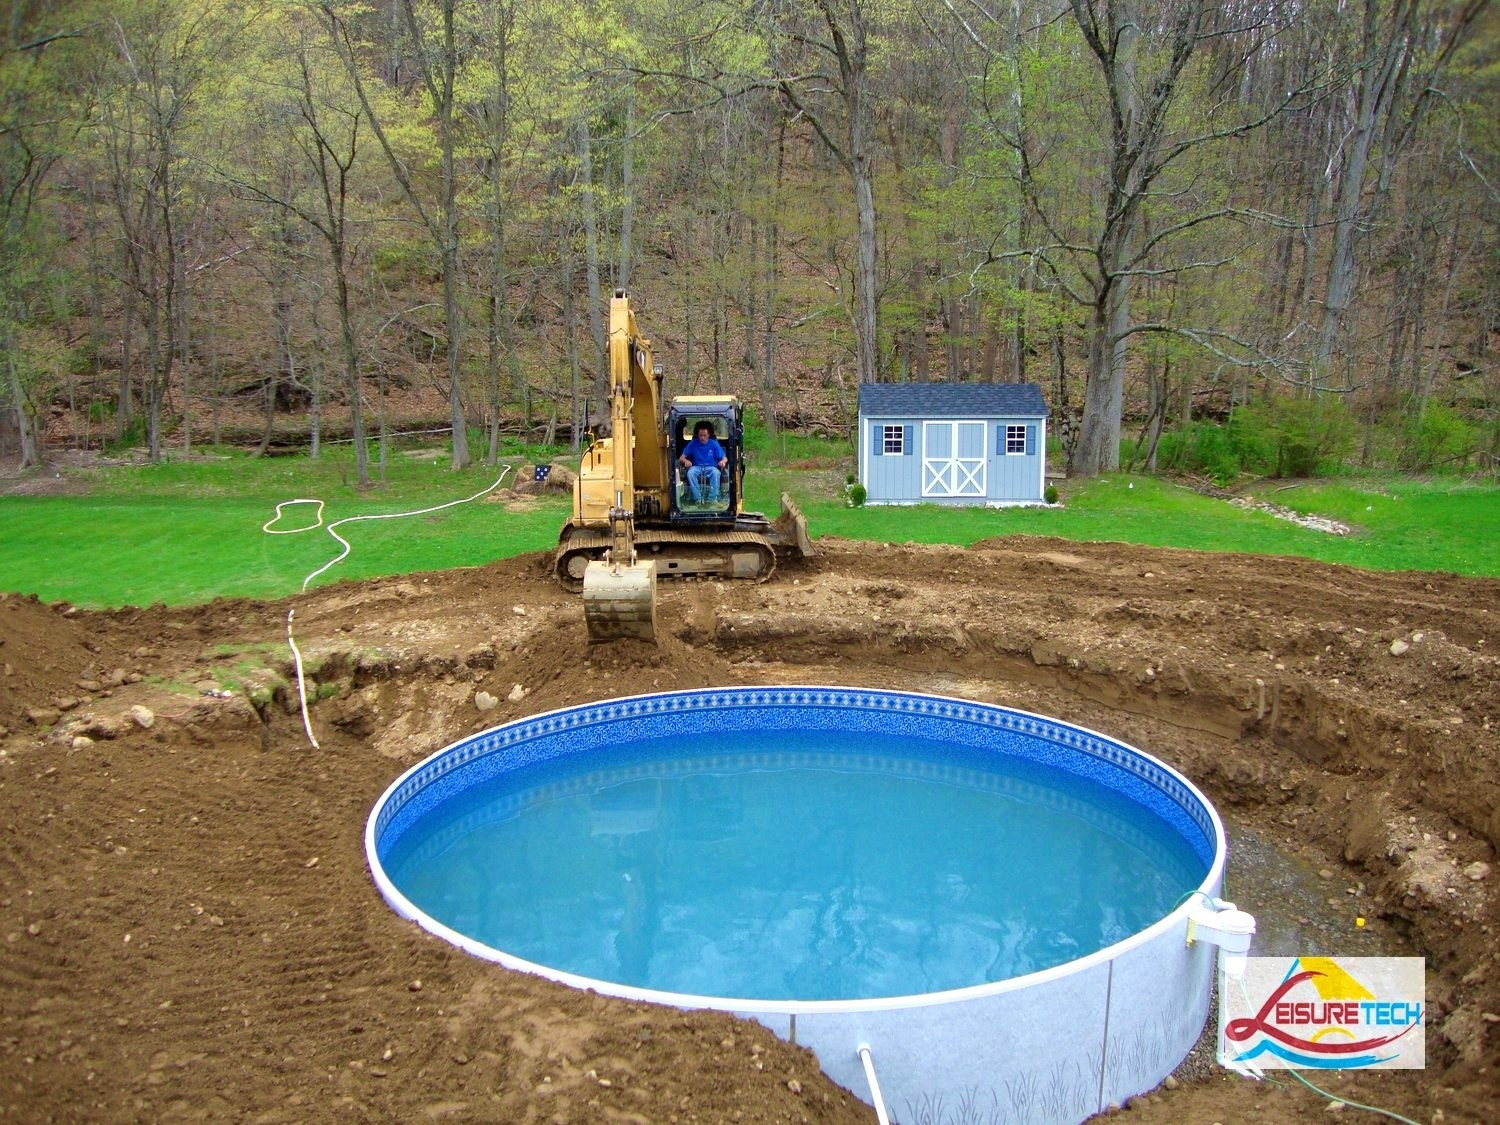 Above Ground Pool Landscaping Fresh Landscaping Around Ground Pool Randolph Of Above Ground Pool Landscaping 